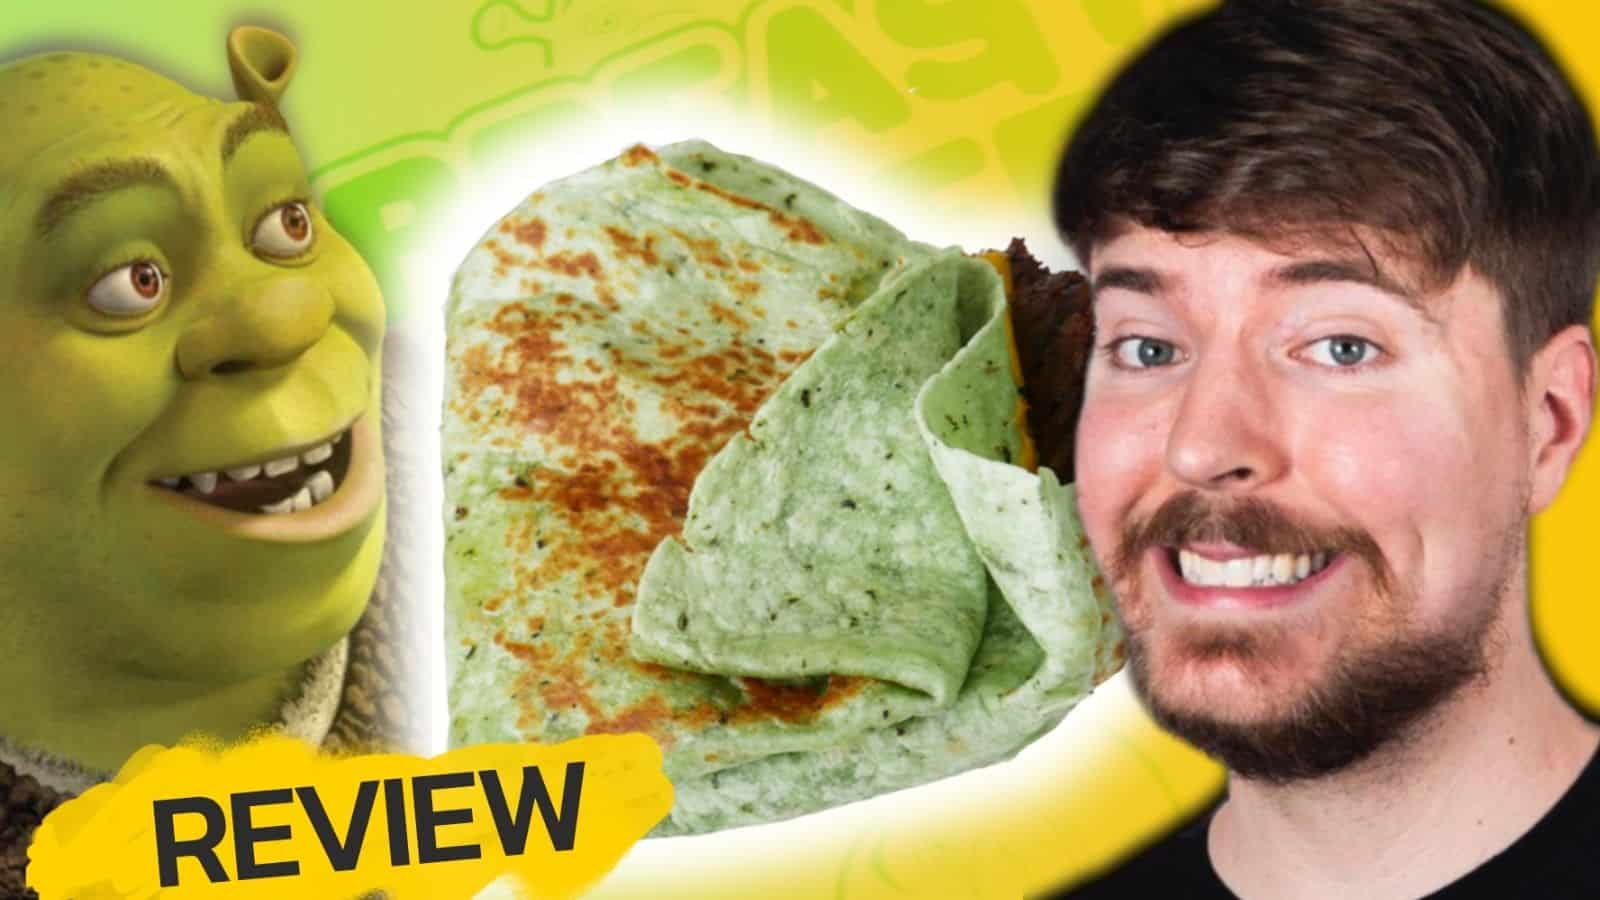 A Review Absolutely No One Asked For: The MrBeast Shrek Quesadilla